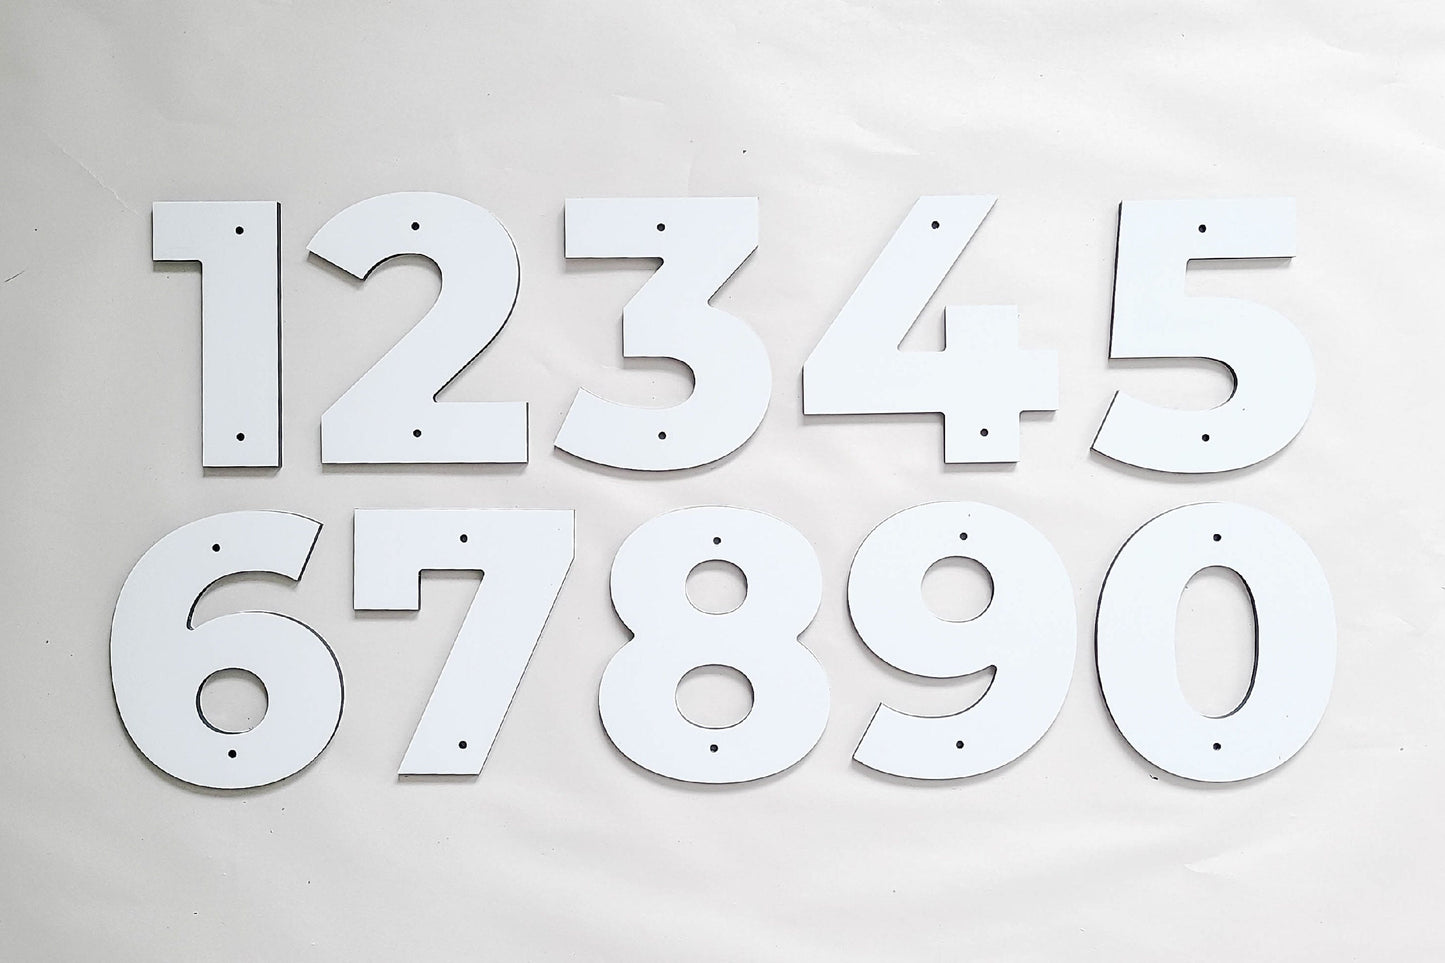 white BOLD RETRO house numbers